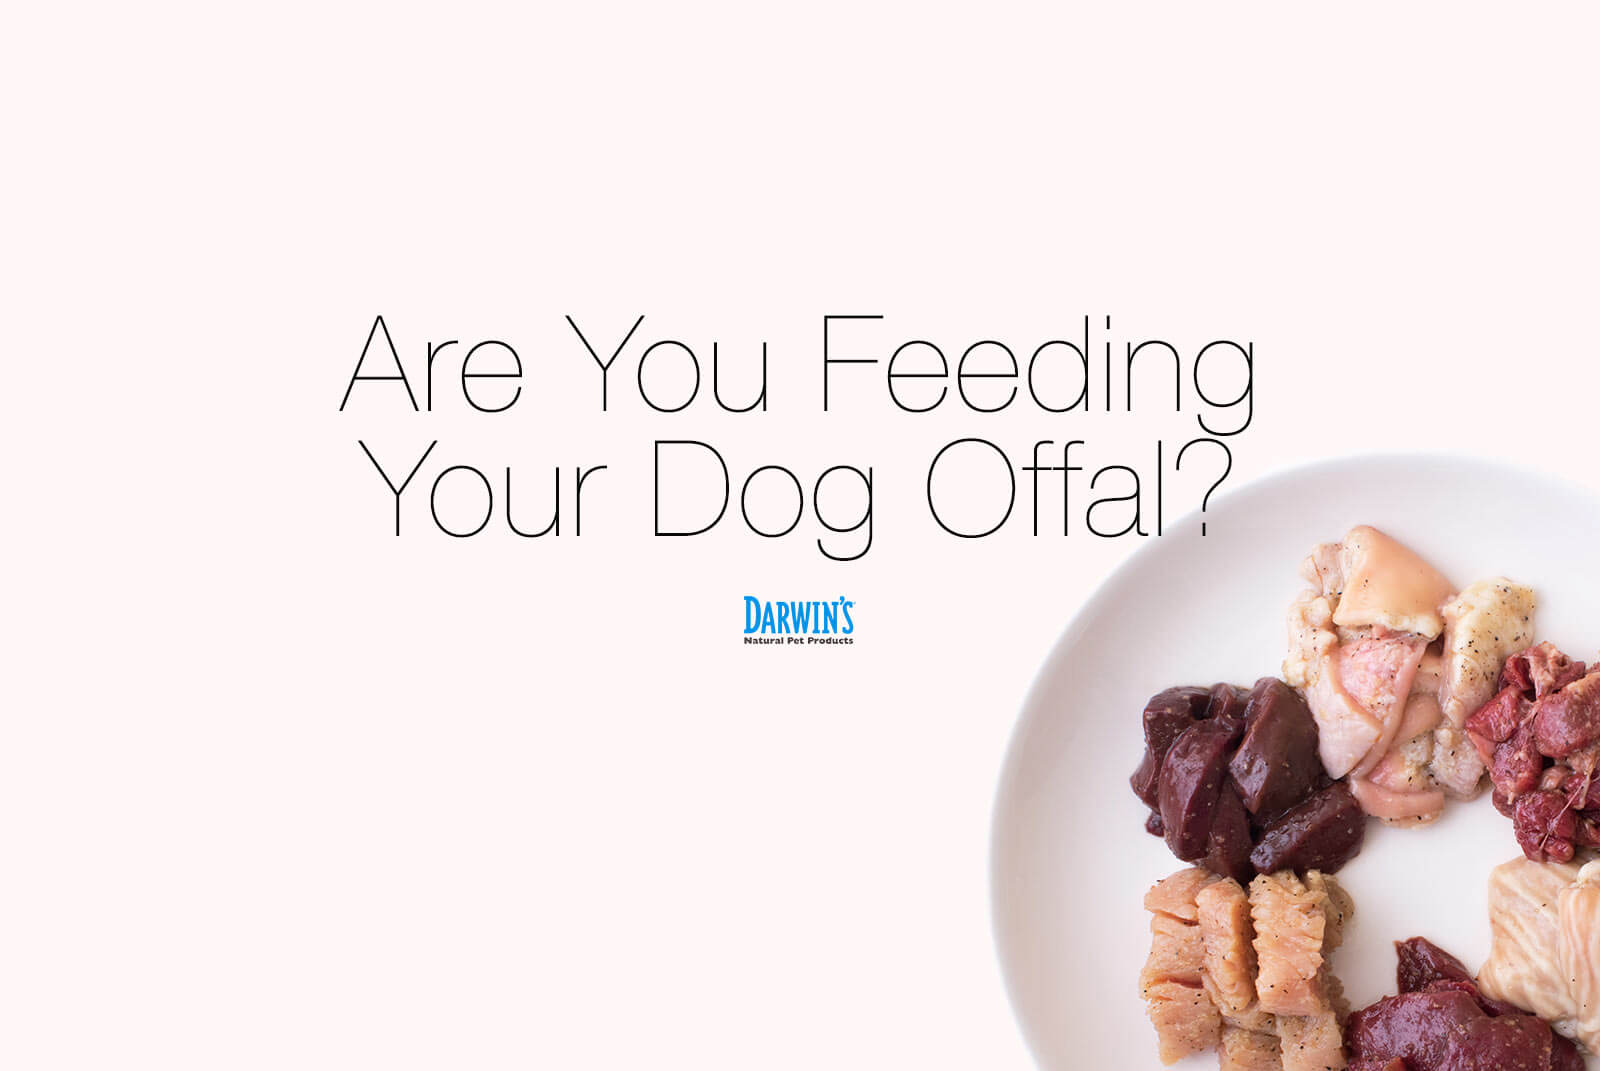 Are You Feeding Your Dog Offal?